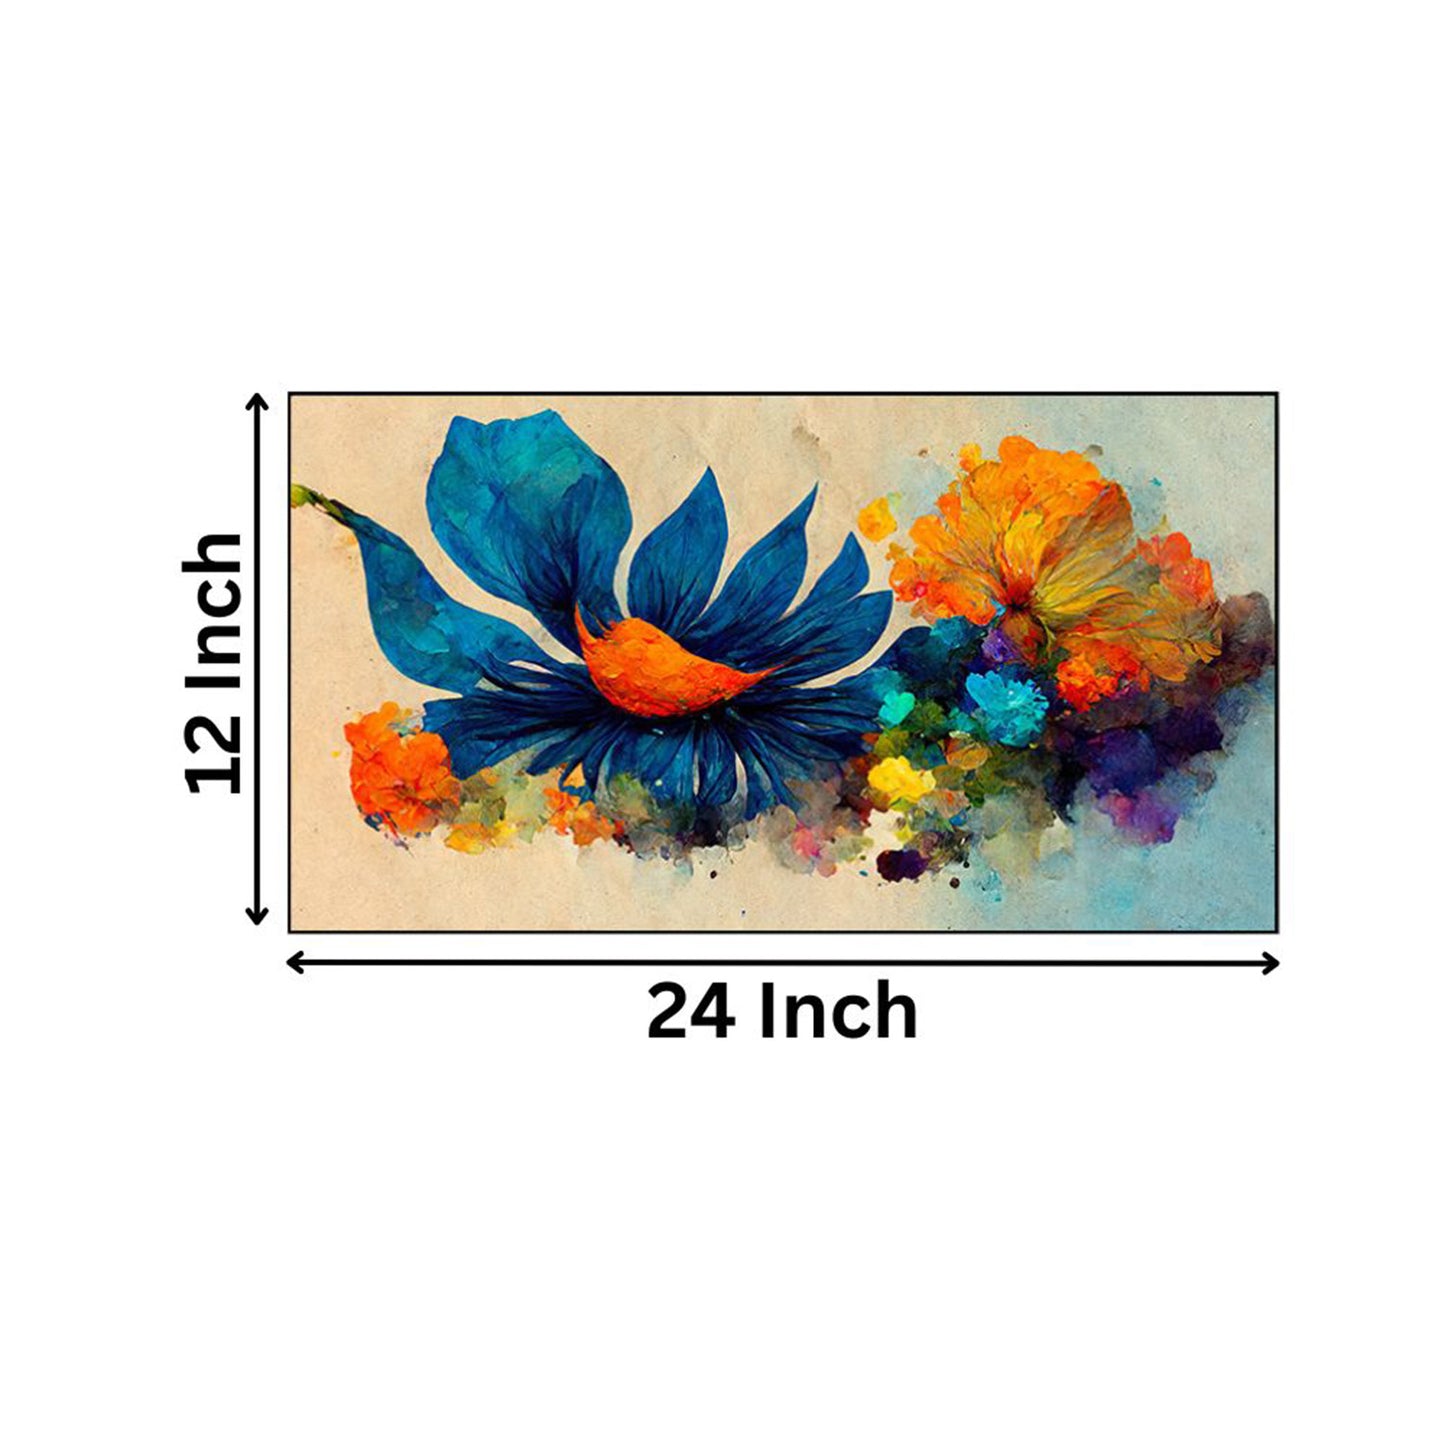 Vibrant Blue Flower Amidst Blossoms Wall Painting